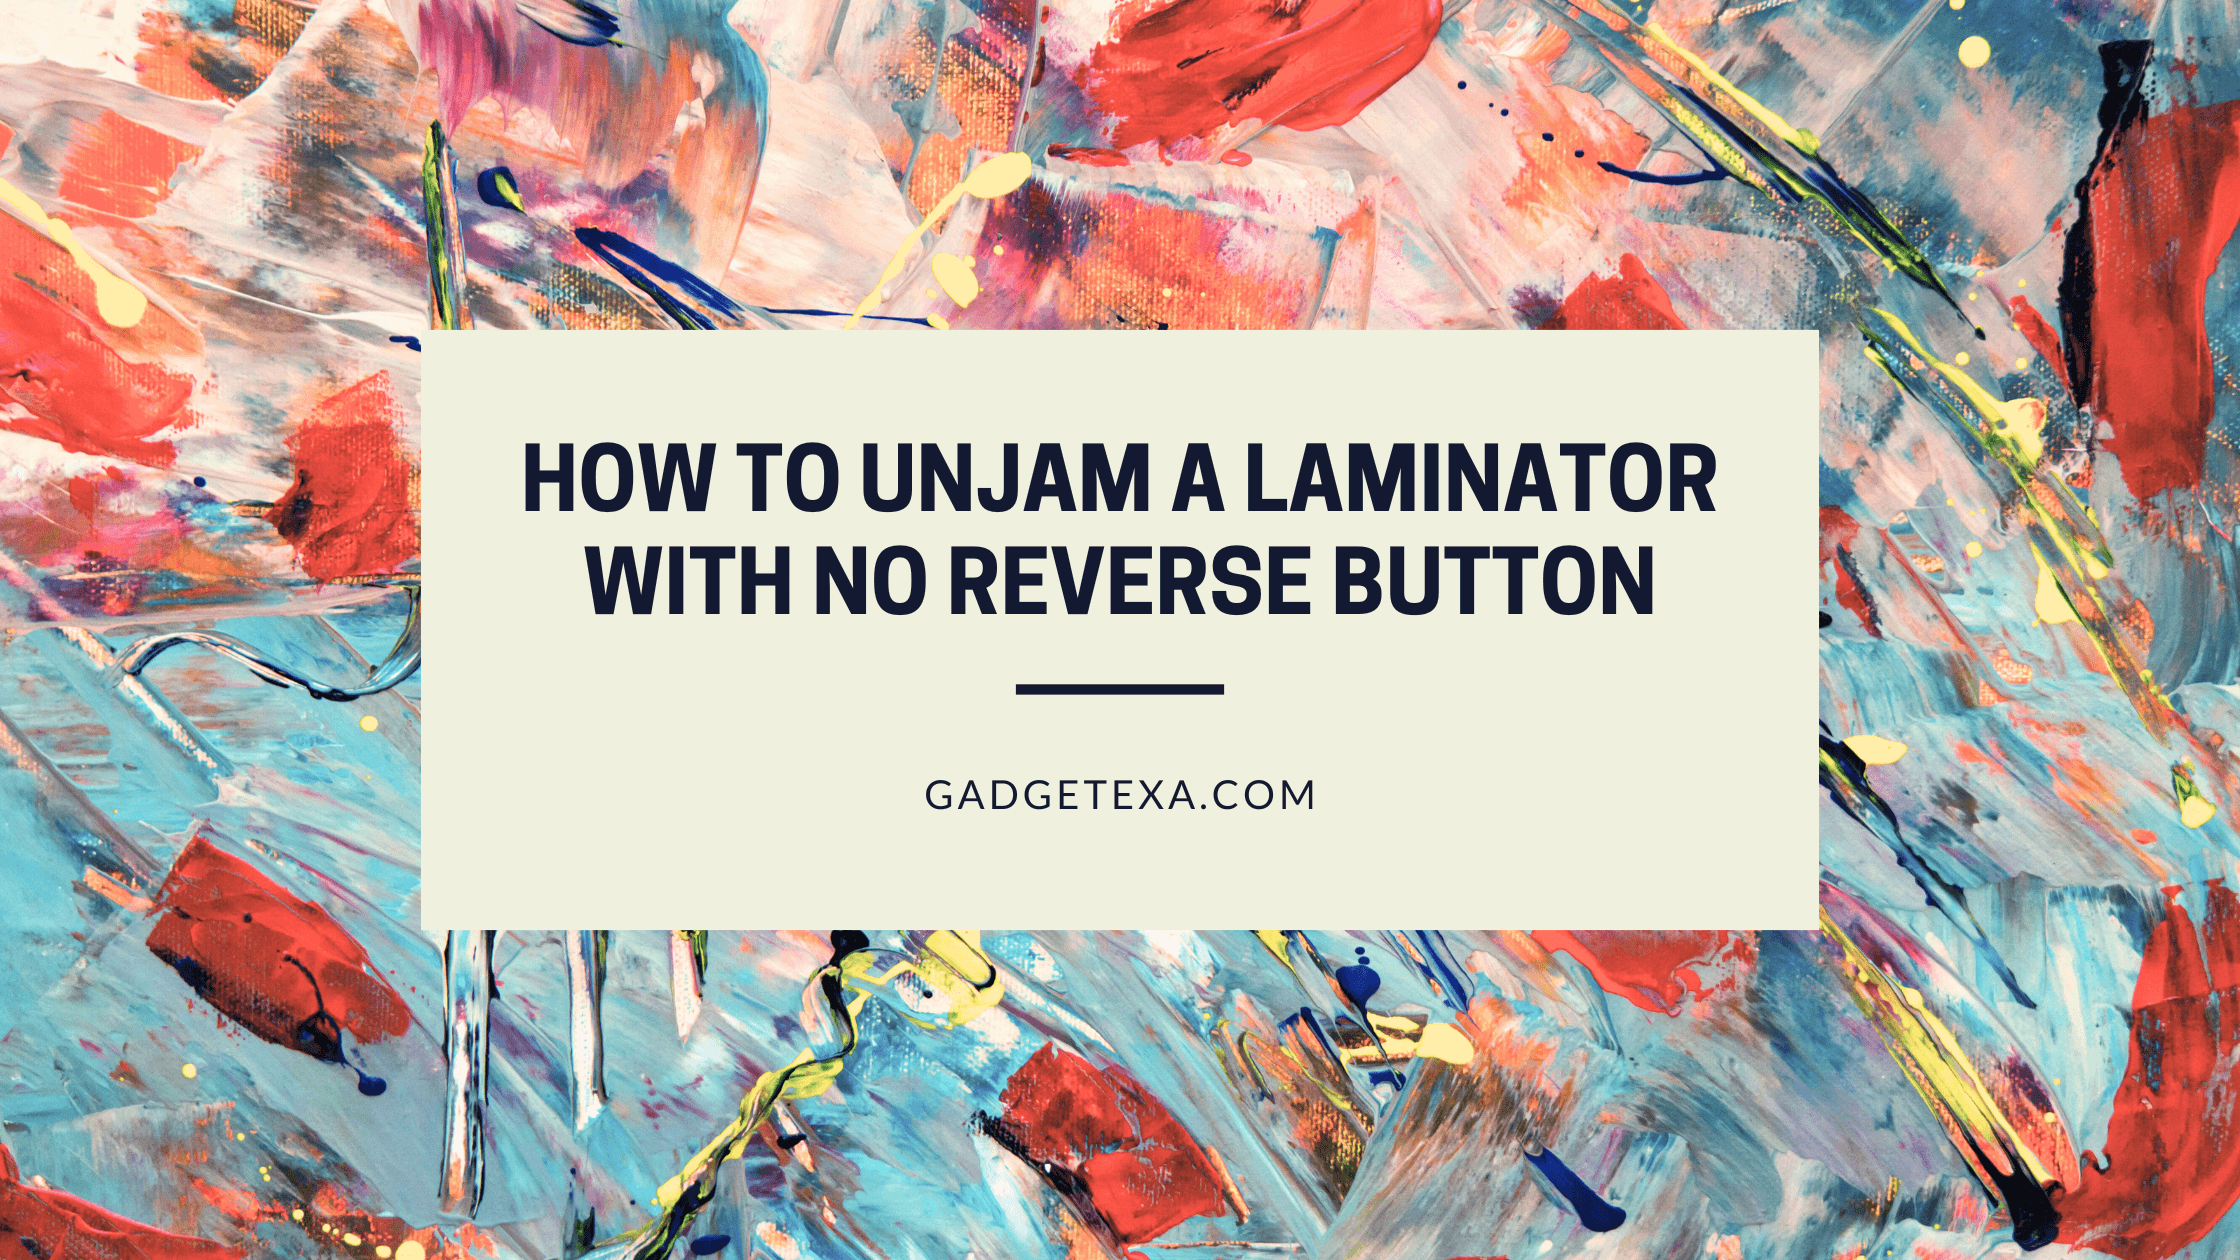 You are currently viewing How to unjam a laminator with no reverse button